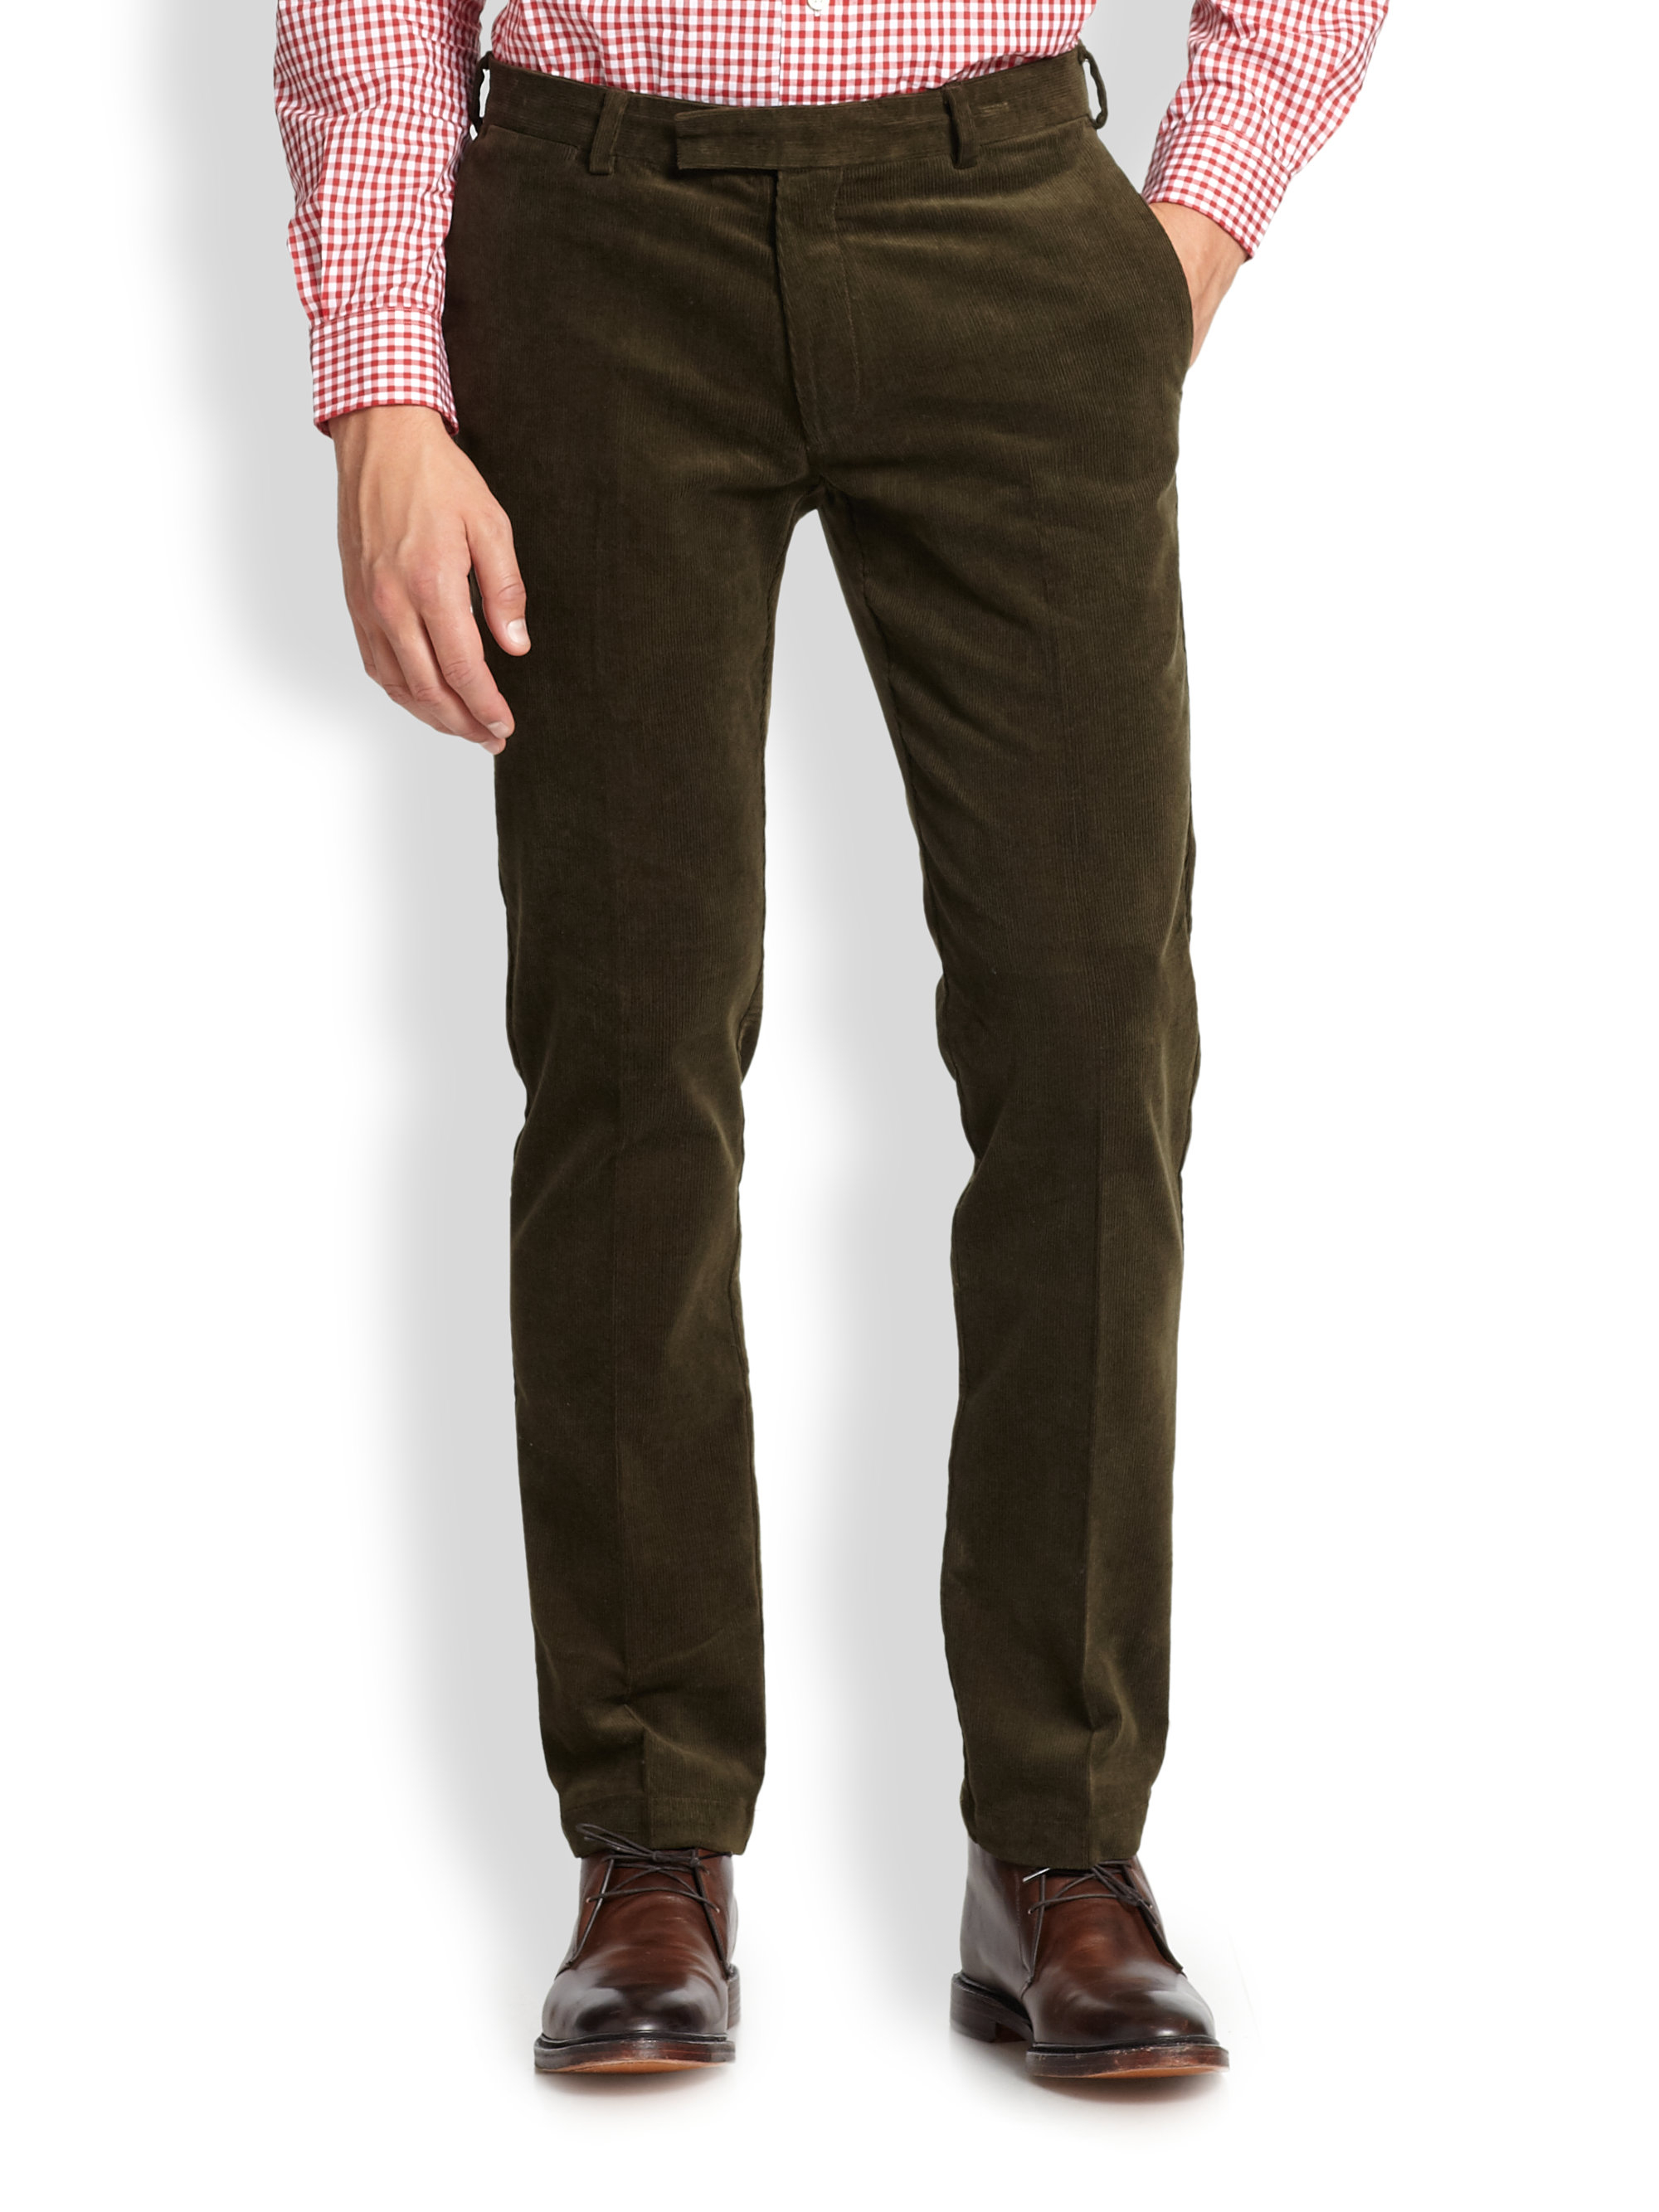 Polo ralph lauren Slim-Fit Hudson Stretch Corduroy Pants in Brown for ...